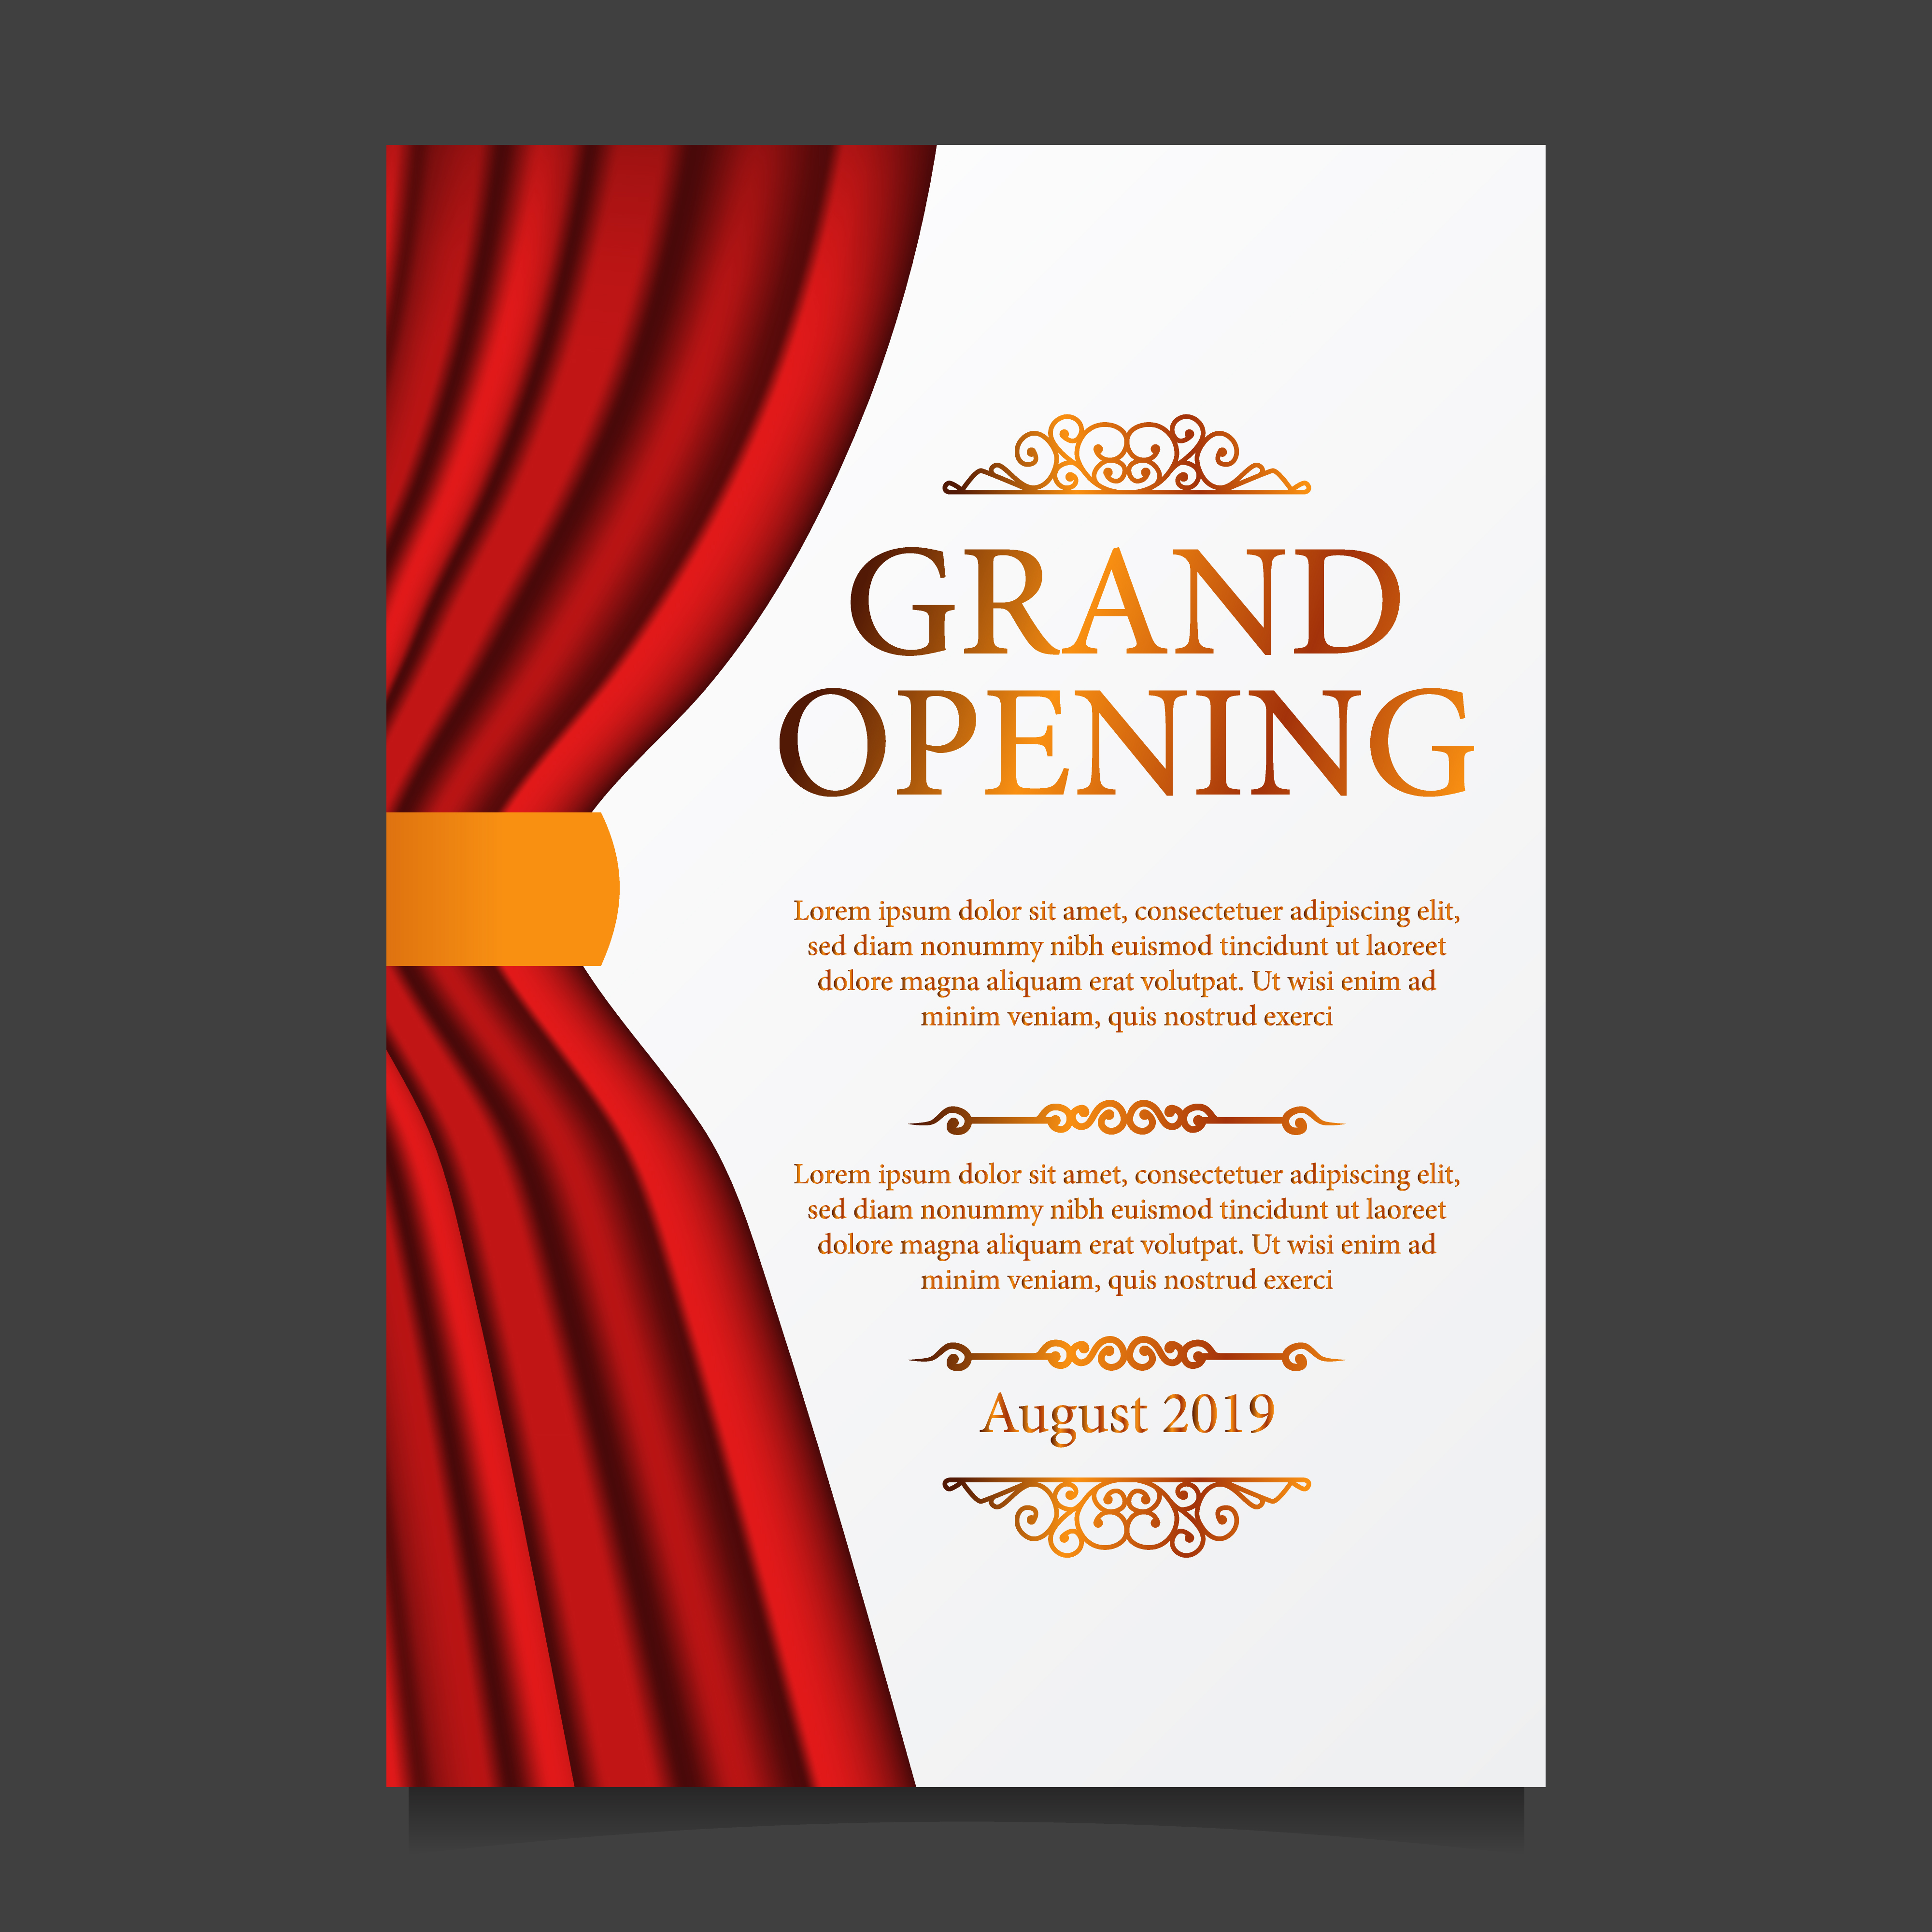 Grand Opening Invitation Card with Red Curtain Stock Illustration